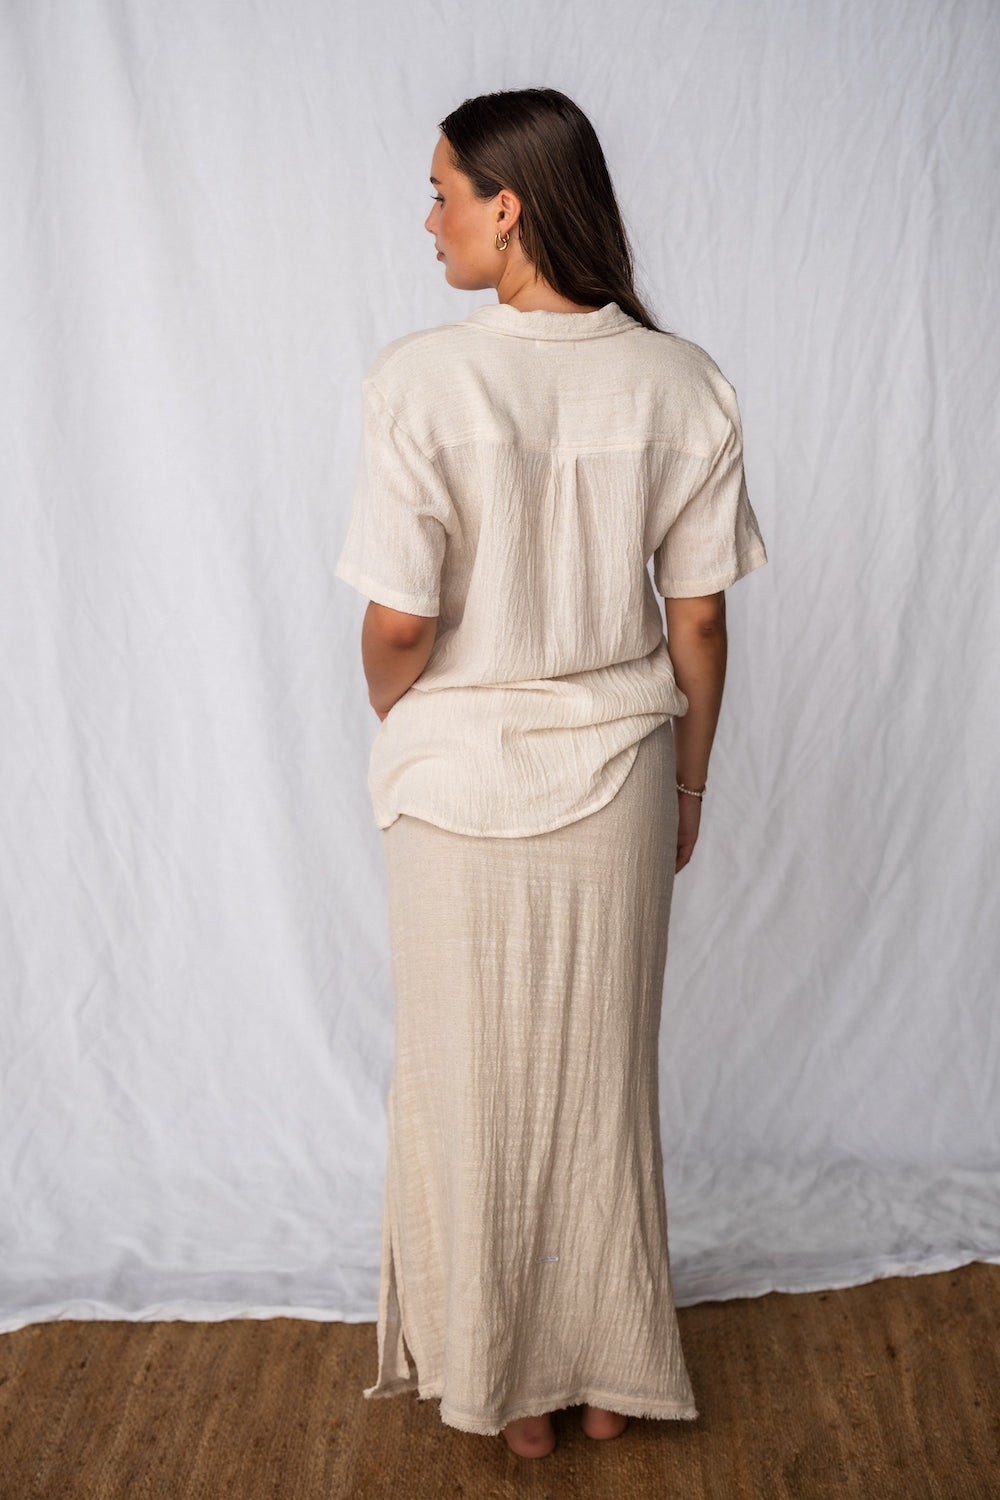 Cove Shirt and Sienna Maxi Skirt Set - Malia The Label - Sustainably made from plant fibres